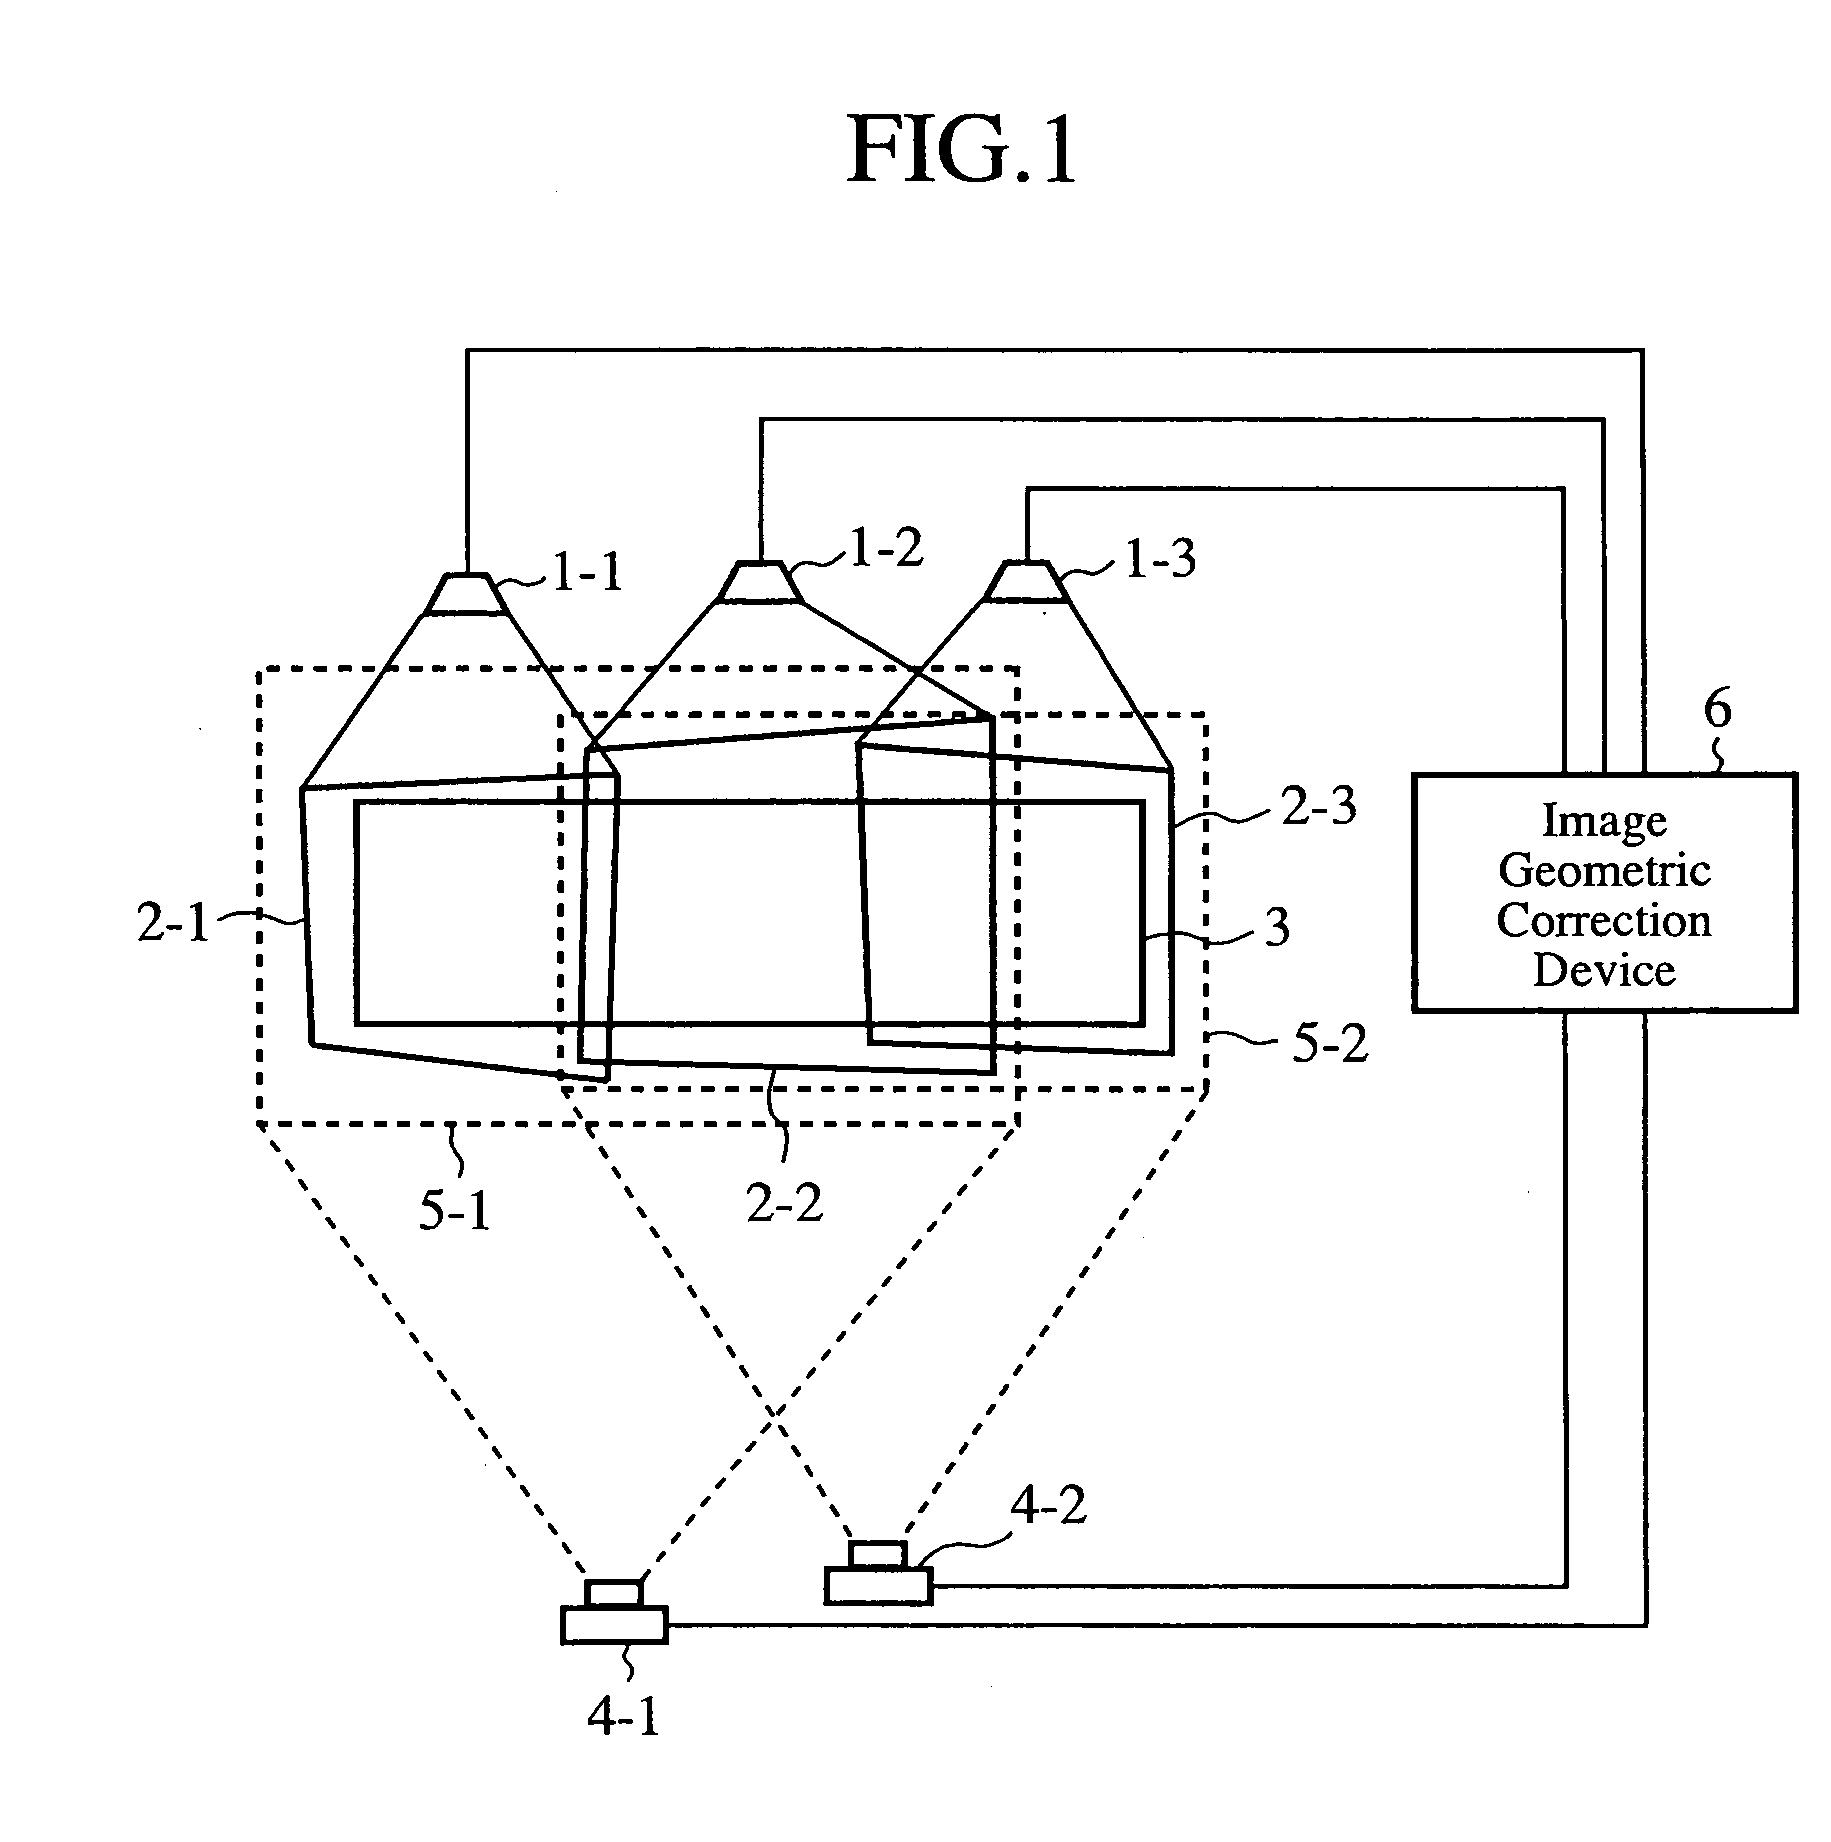 Image Projection System and Image Geometric Correction Device